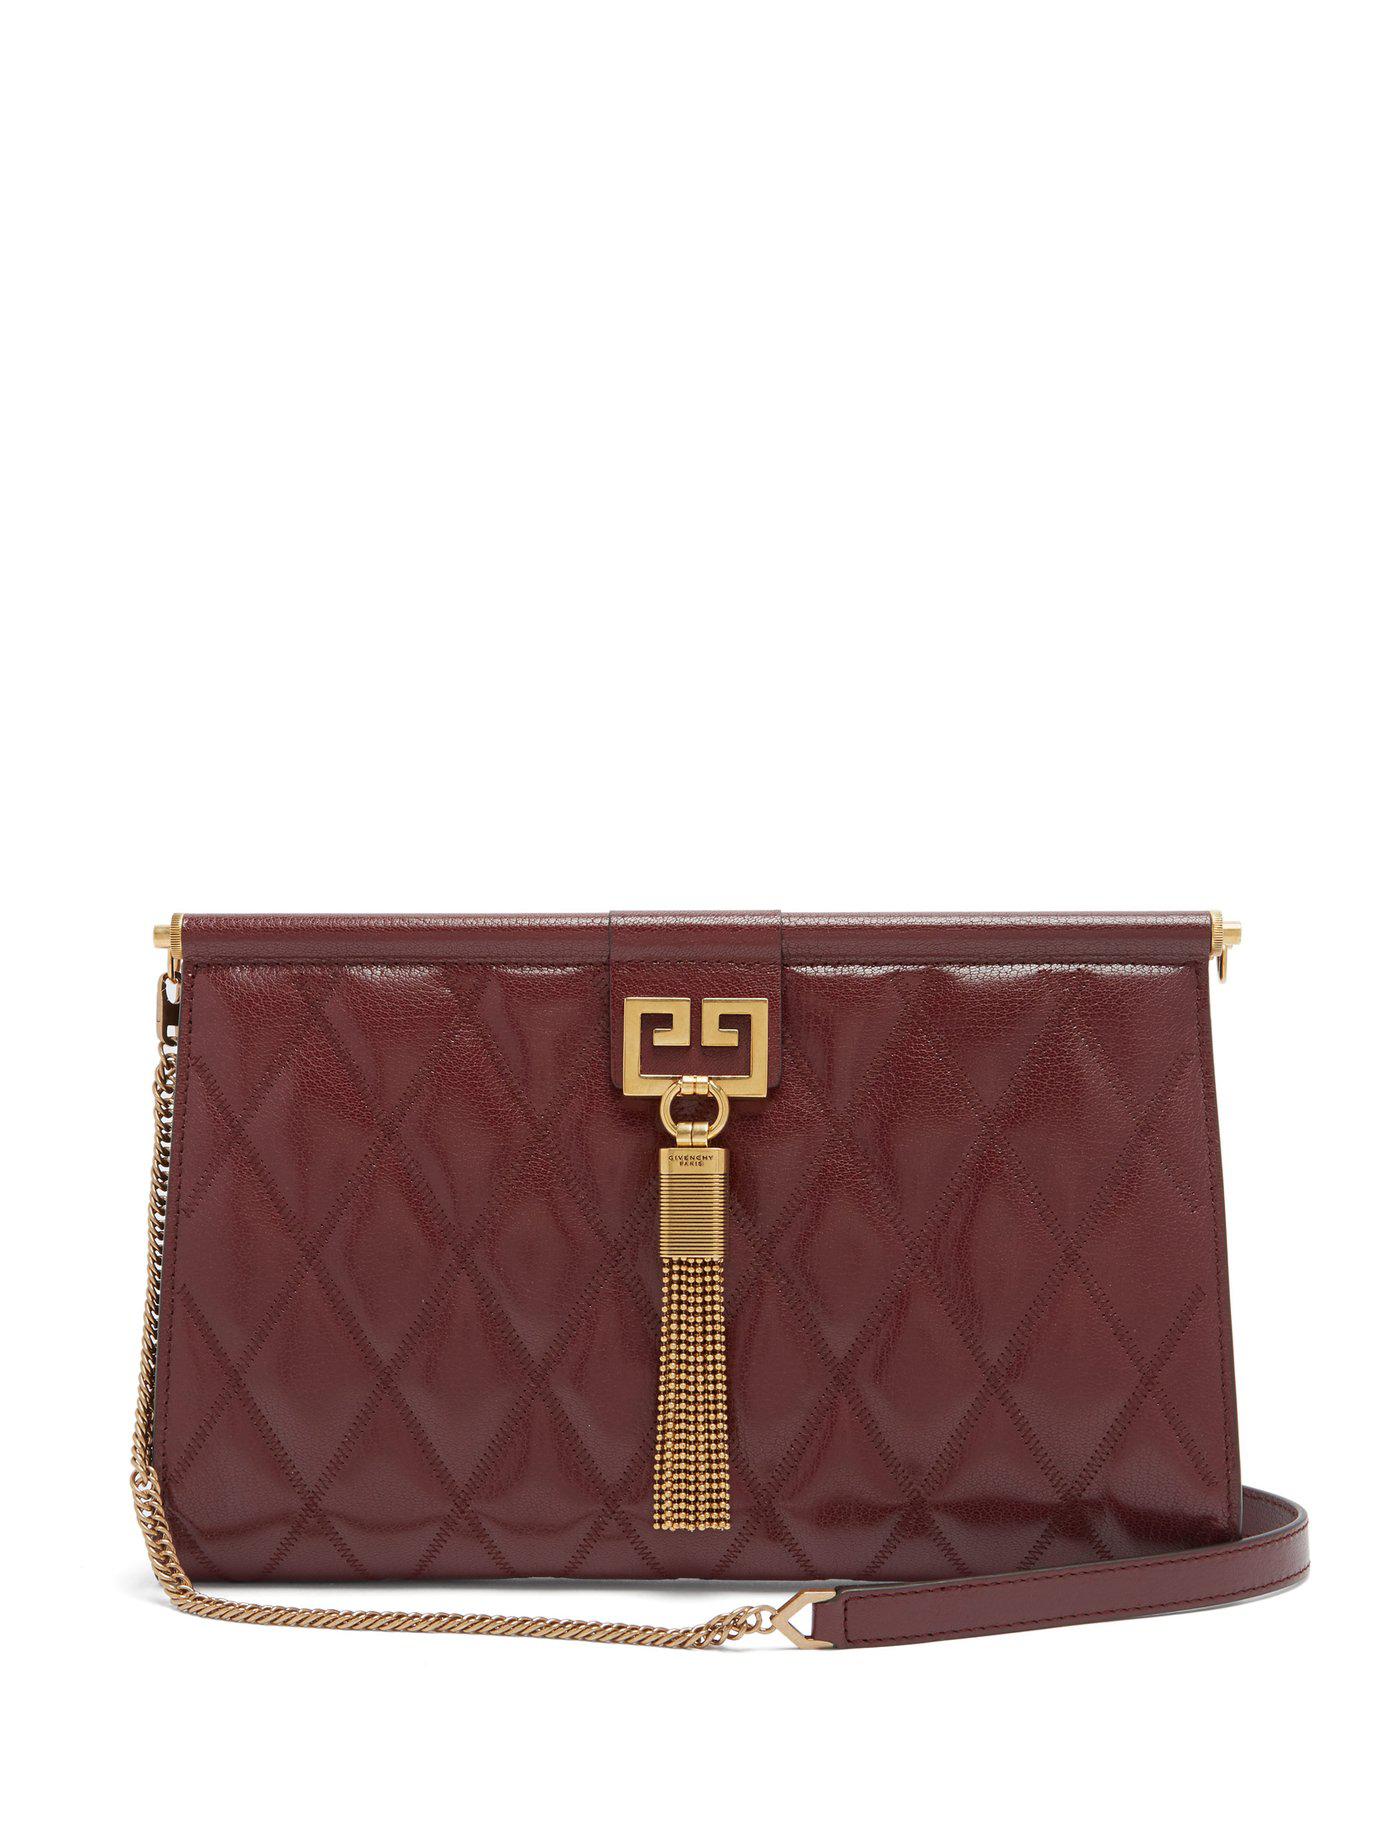 Givenchy Gem Medium Quilted Leather Bag in Burgundy (Purple) - Lyst